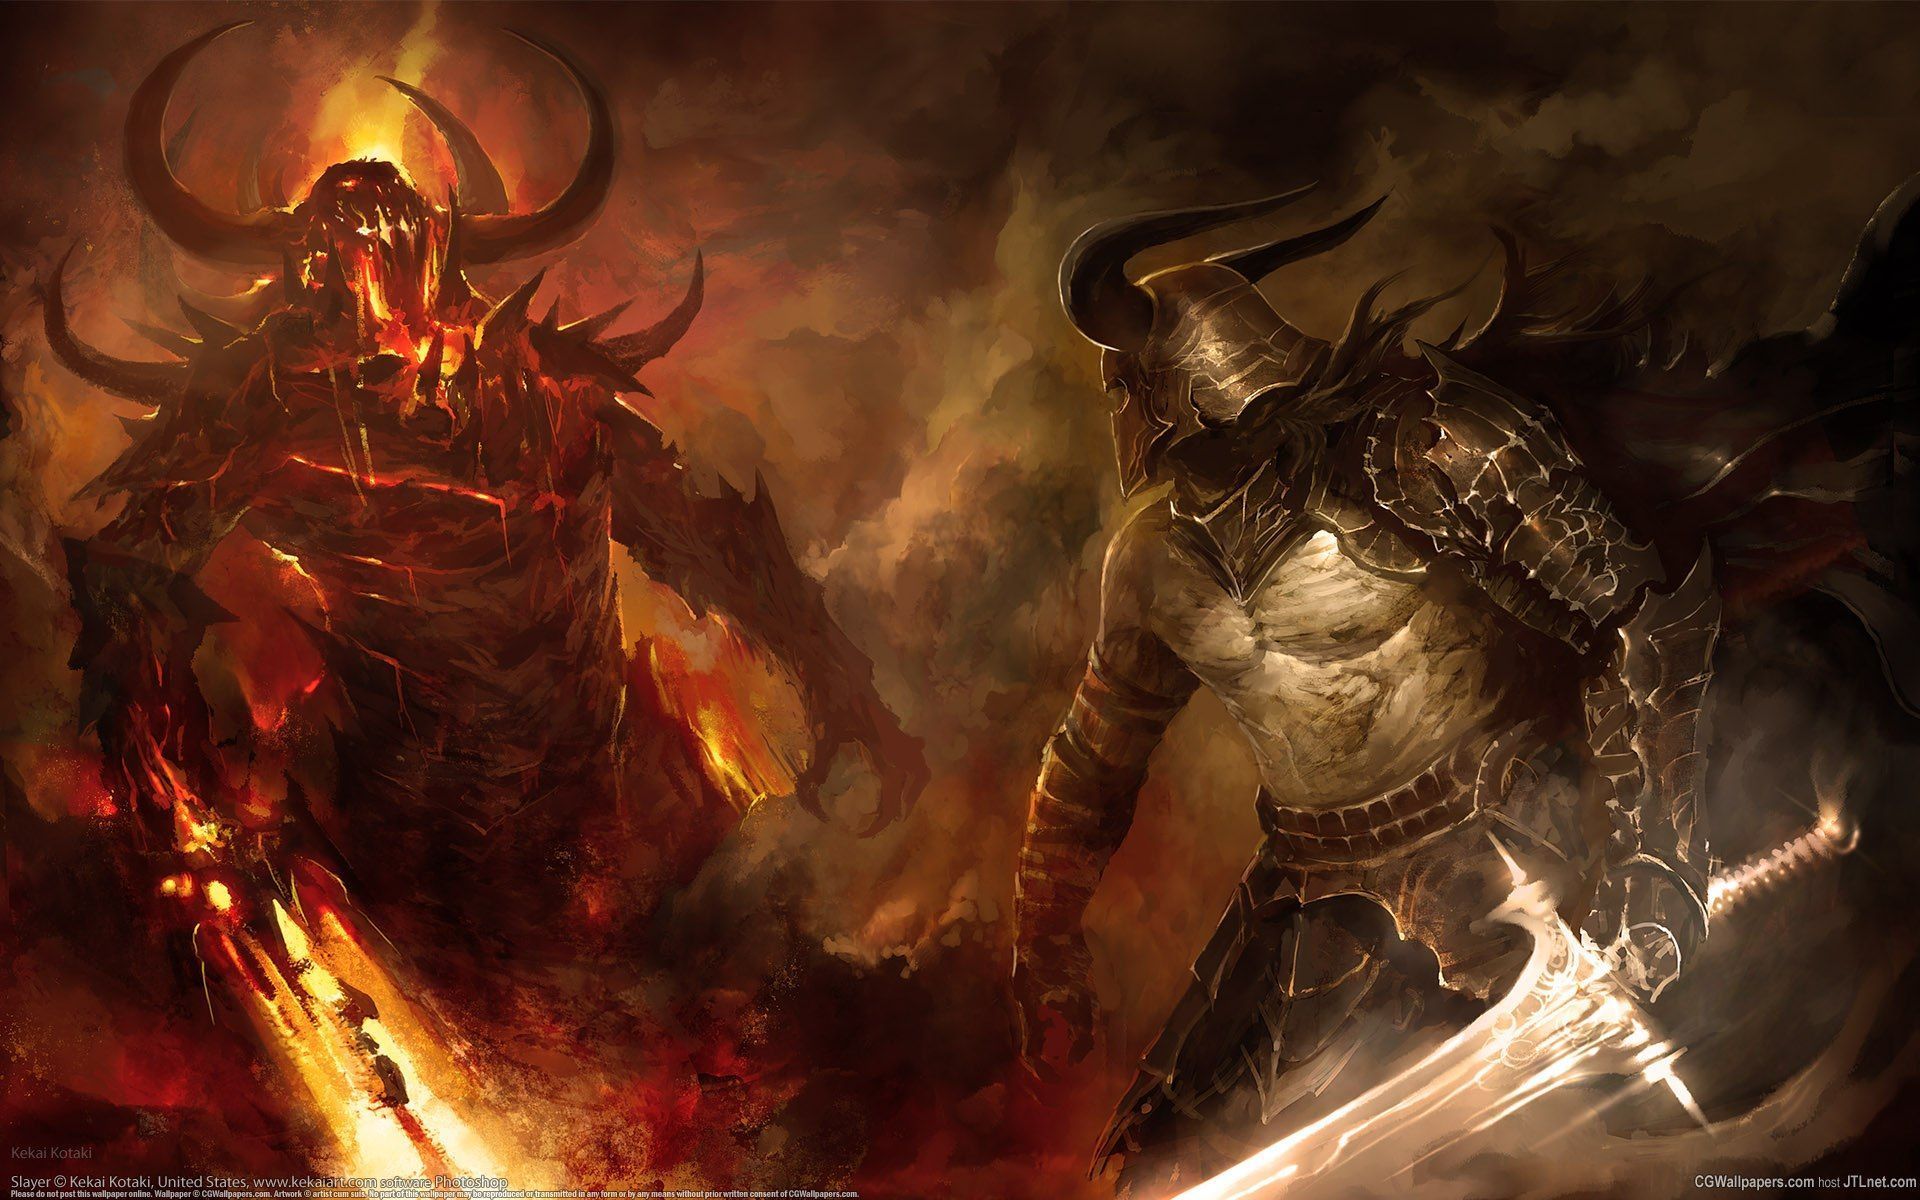 Demon vs knight wallpaper 1920x1200 - - High Quality and other